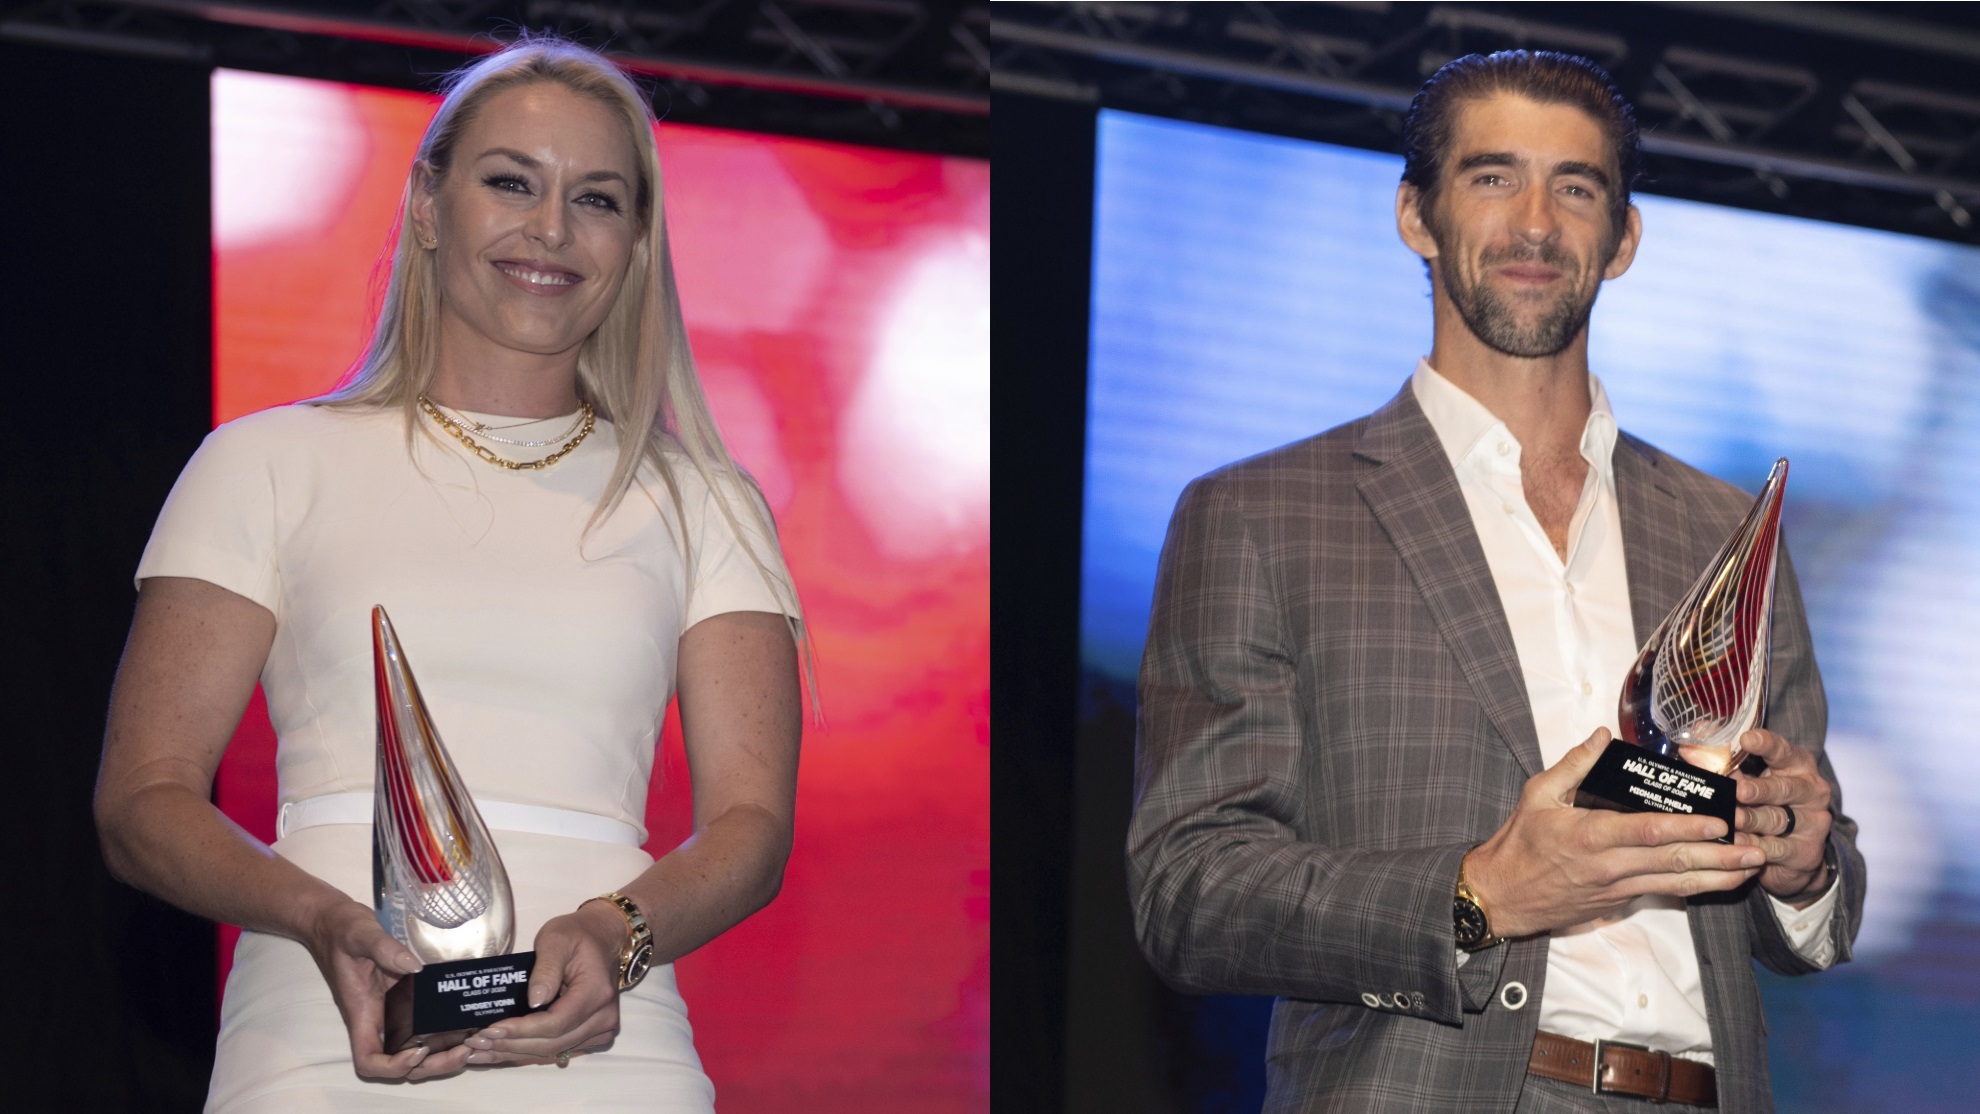 Lindsey Vonn and Michael Phelps inducted into the U.S. Olympic Hall of Fame.